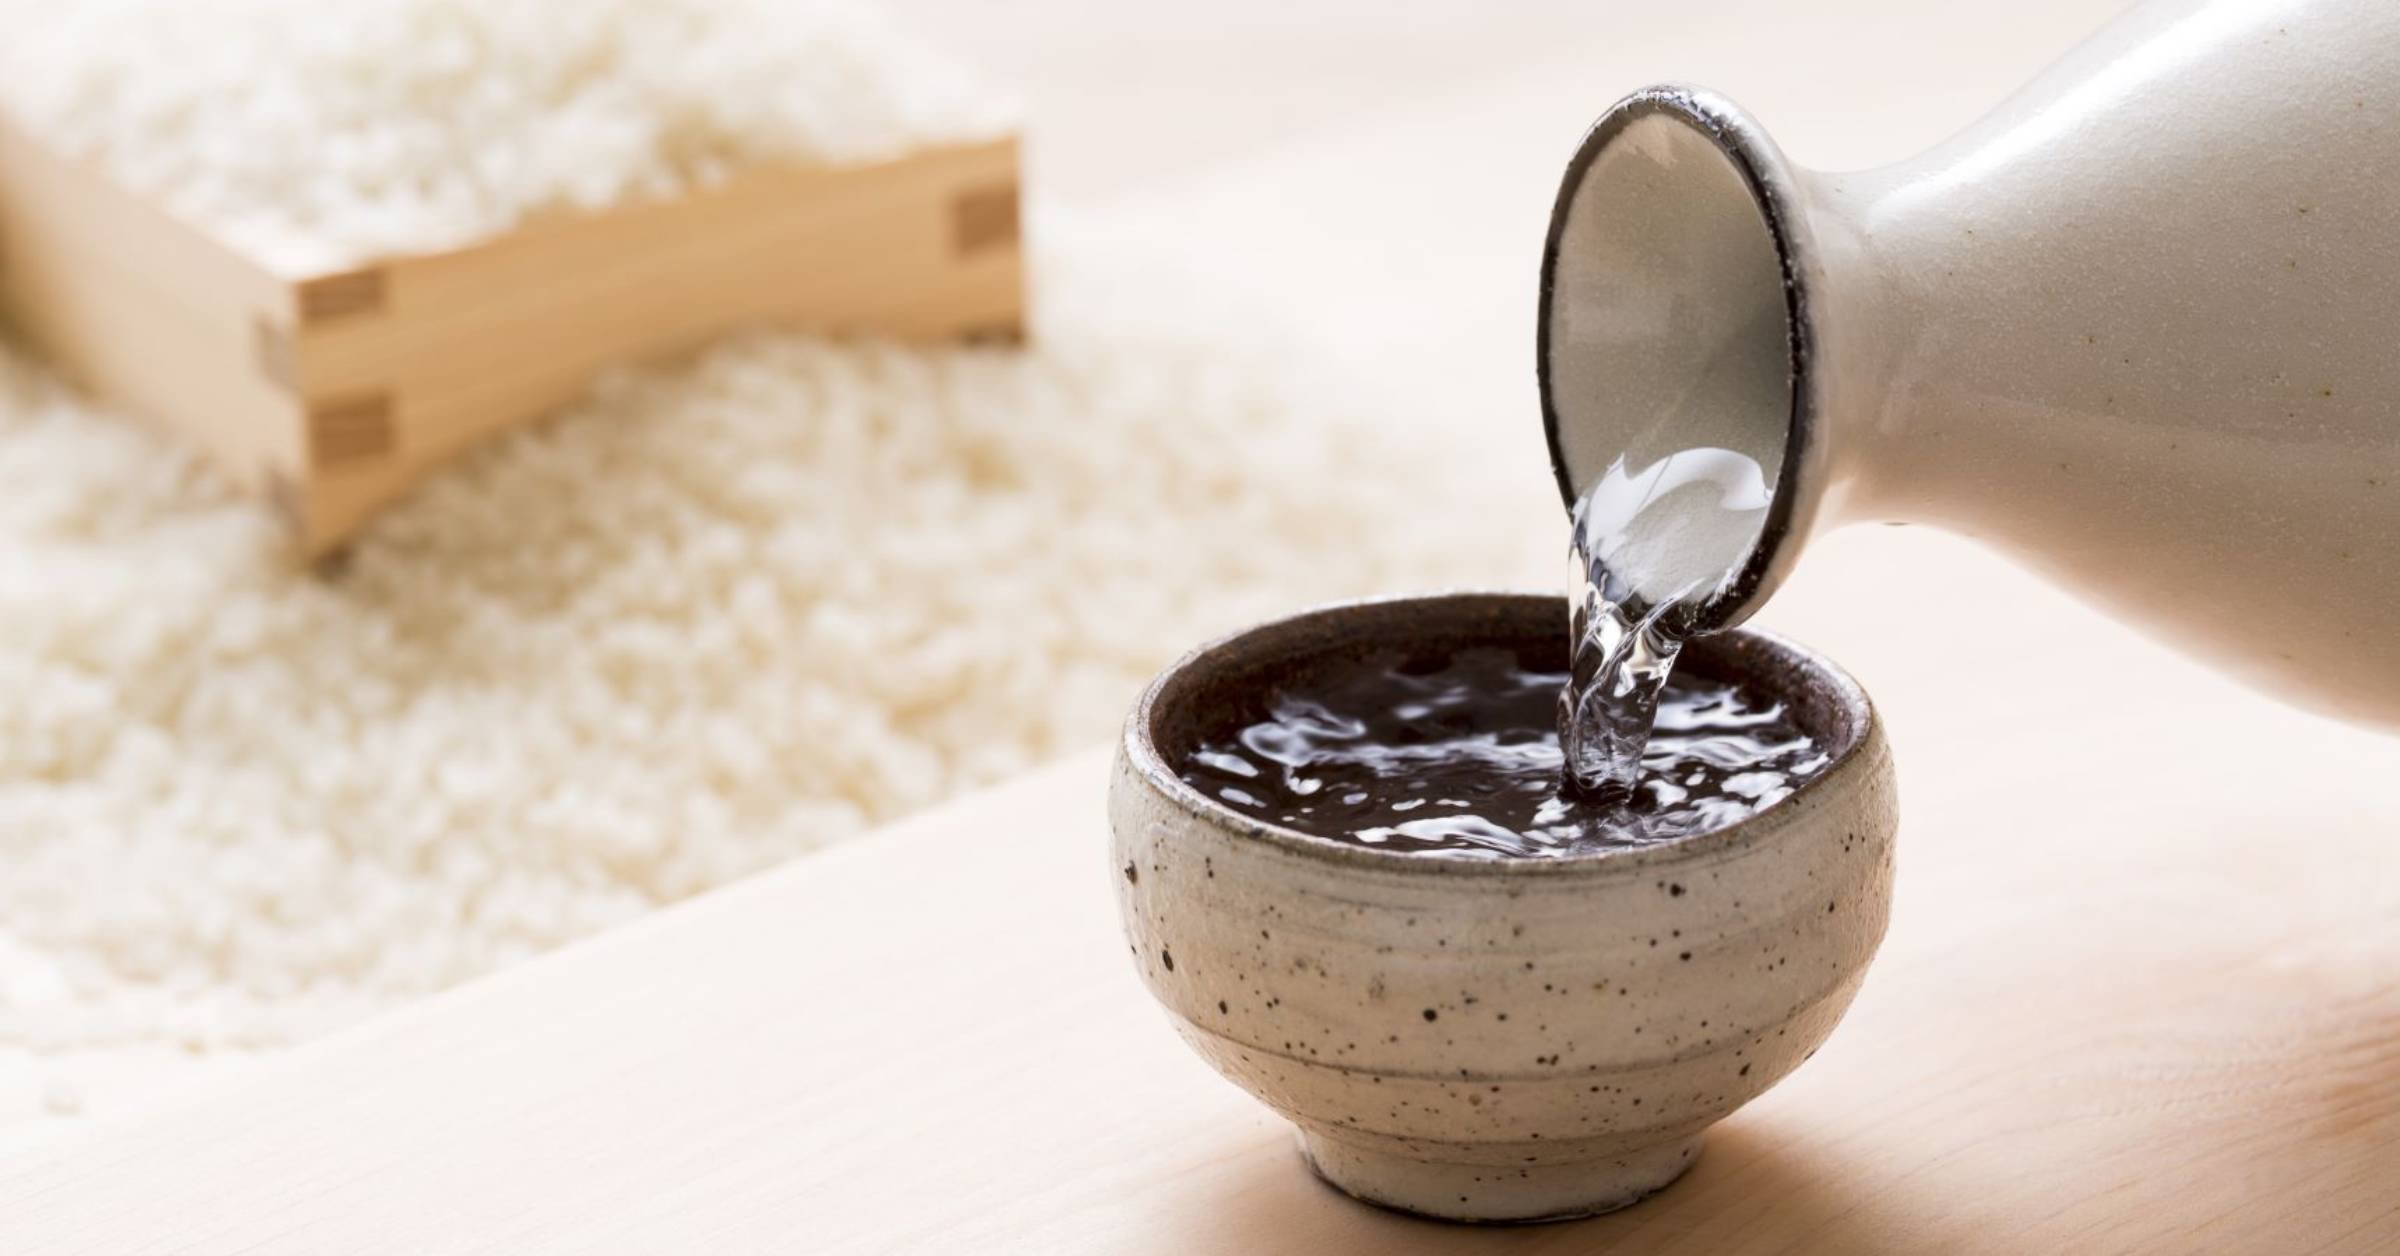 Tips on how to pair and appreciate sake